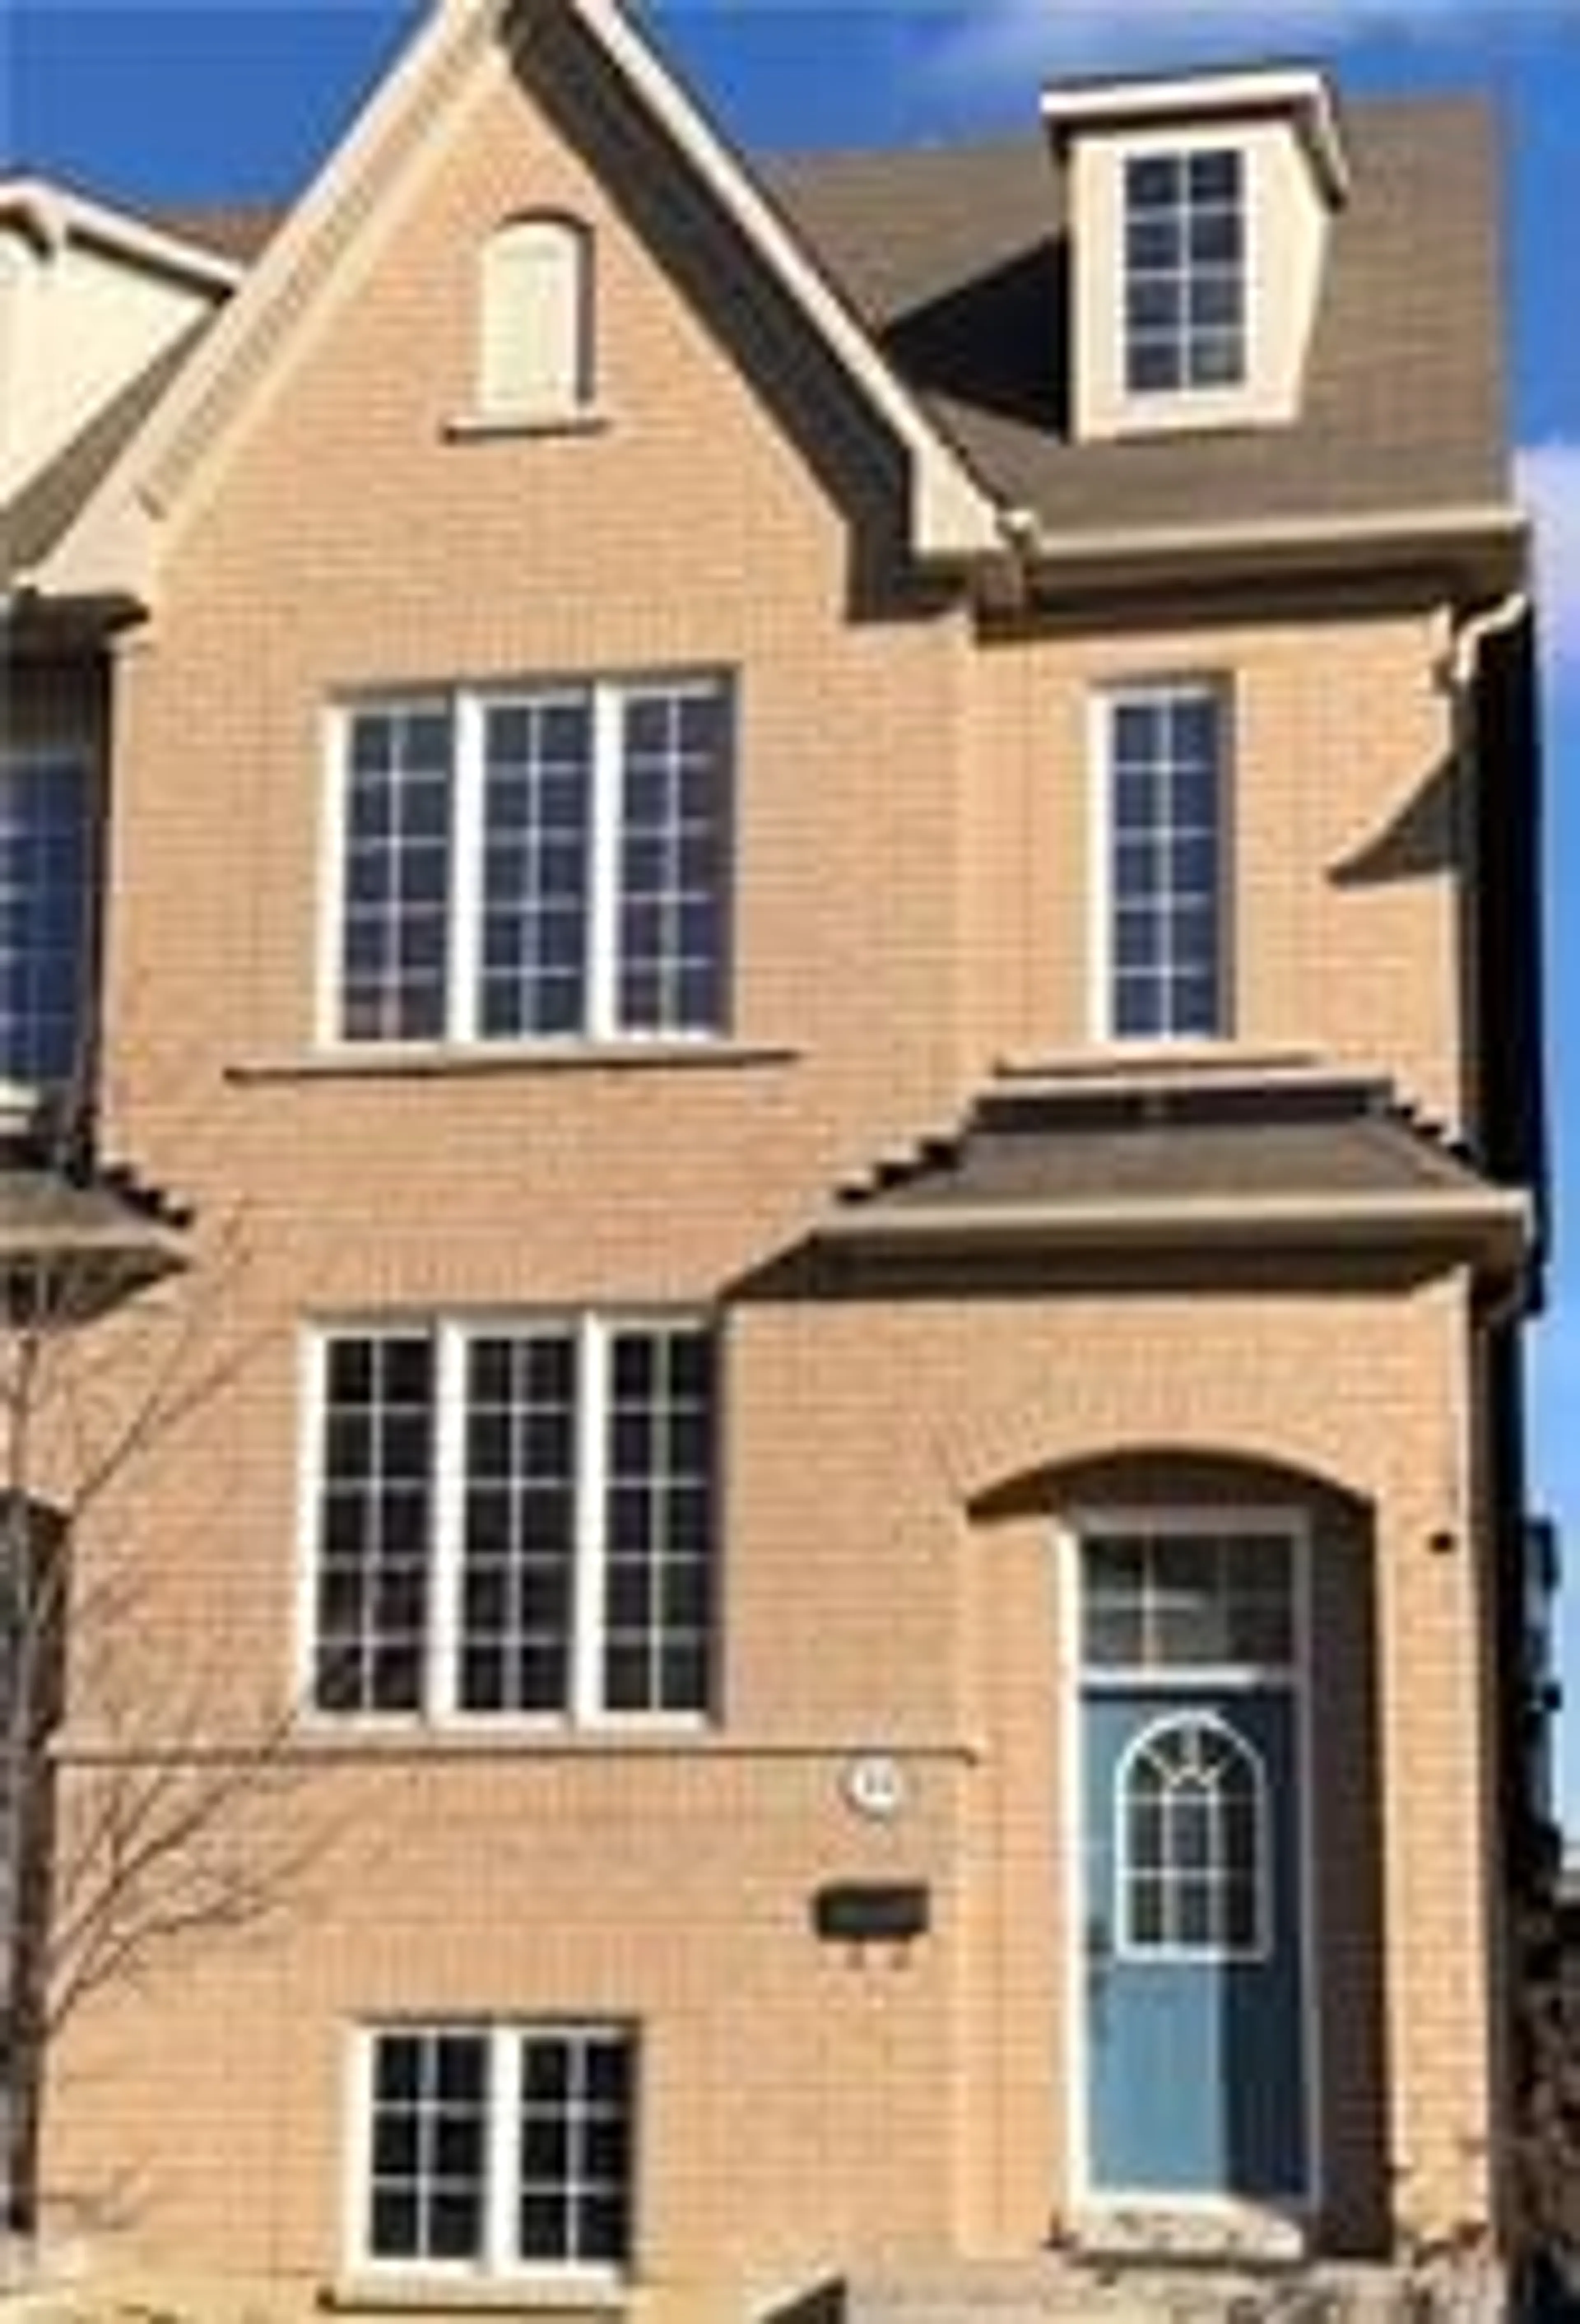 Home with brick exterior material for 23 Hackett Ave, Toronto Ontario M3J 0C7